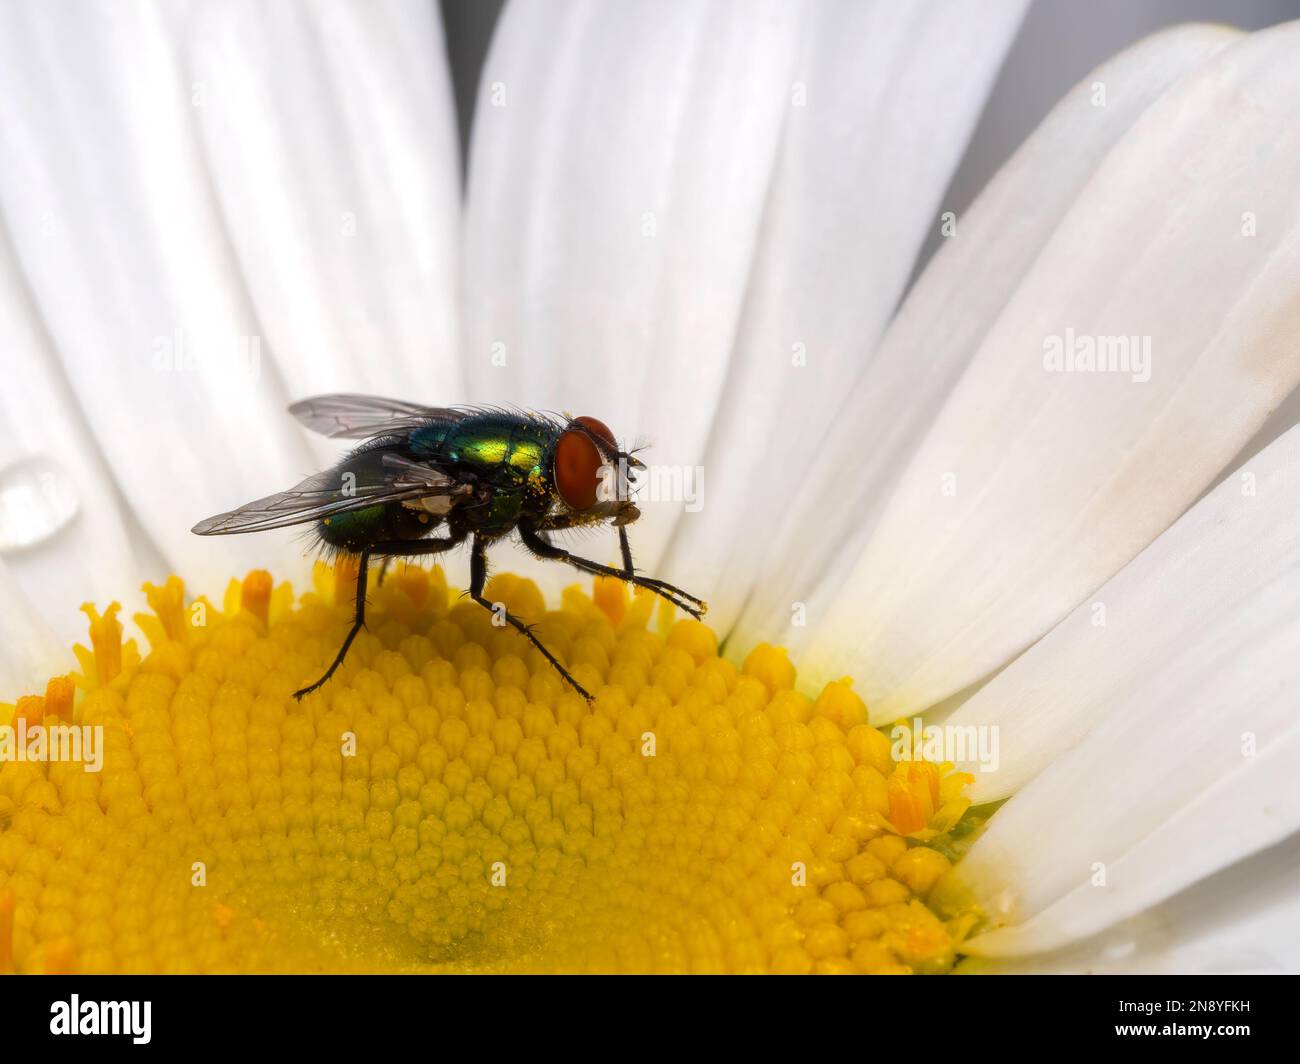 Brightly colored greenbottle blowfly (Lucilia sericata) grooming its front legs while resting on a white and yellow daisy flower Stock Photo